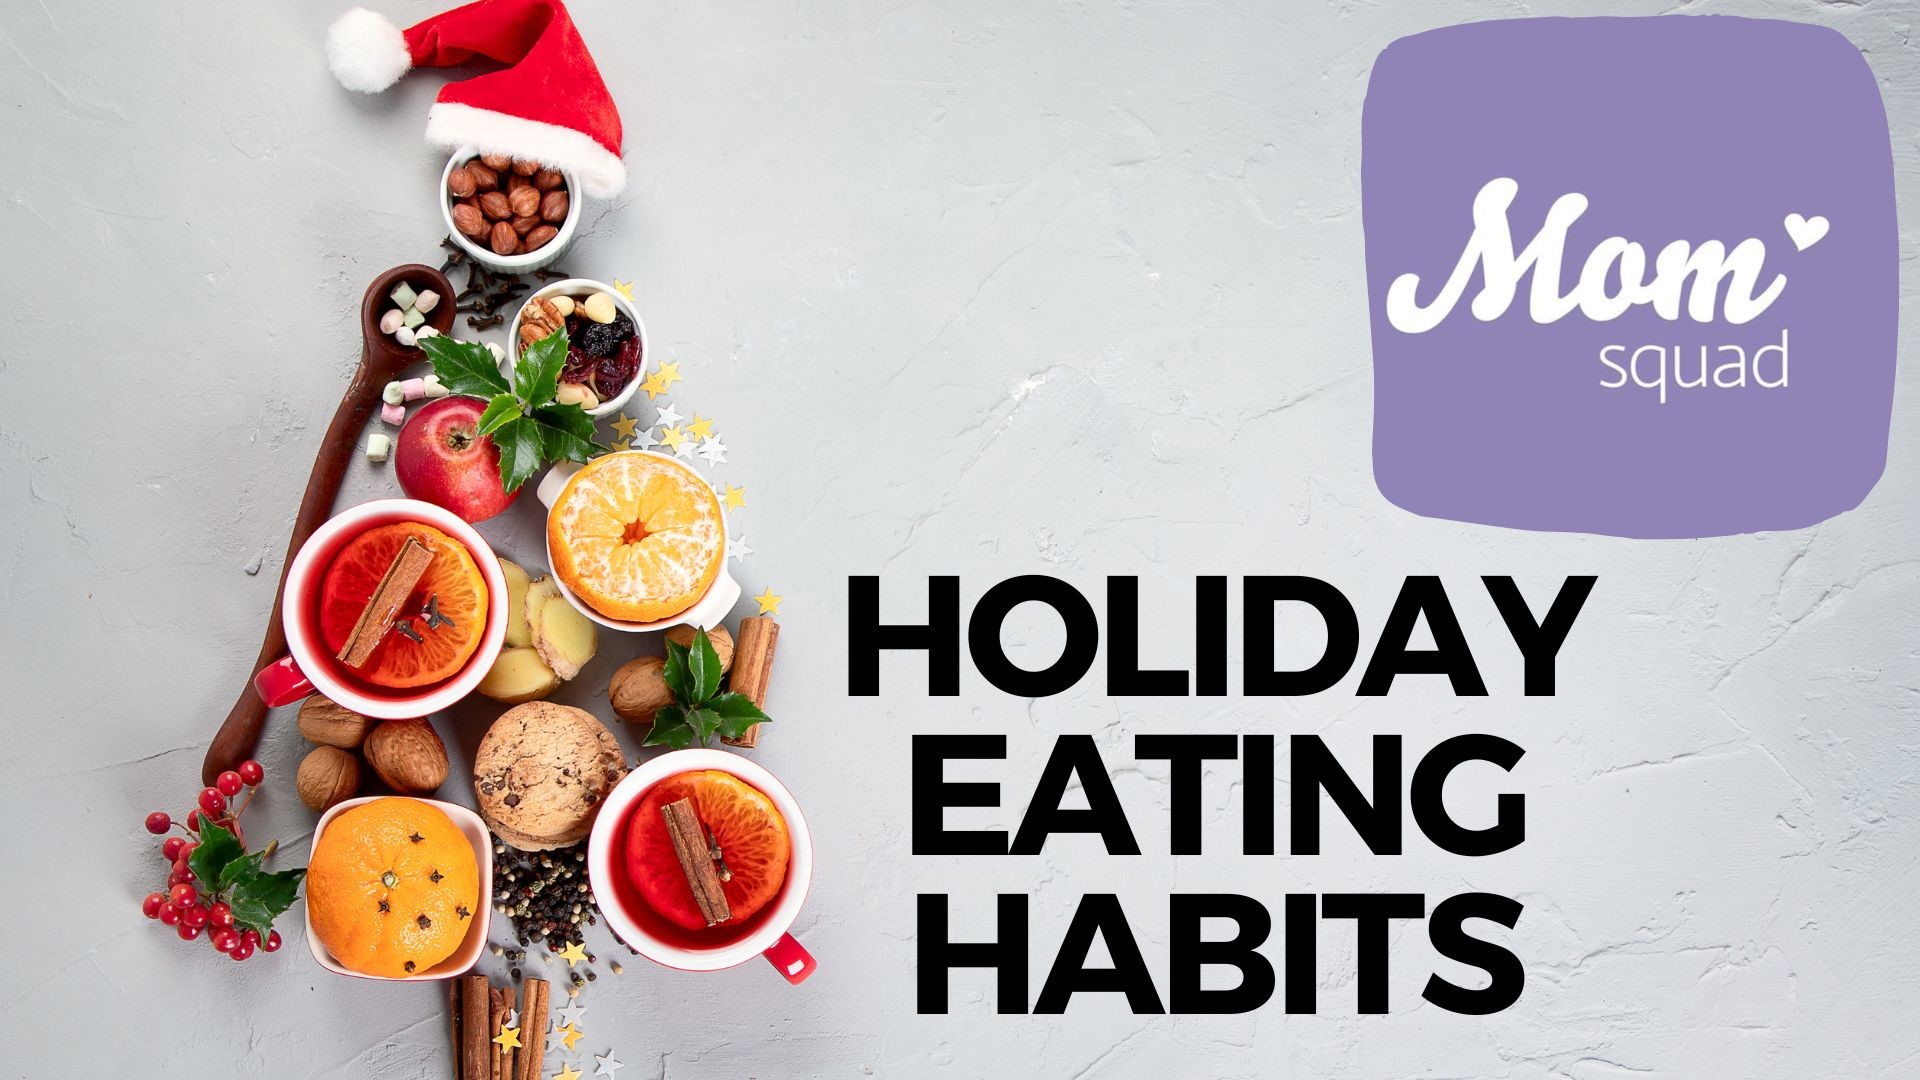 WKYC's Maureen Kyle takes a look at holiday eating habits as we head into Thanksgiving, Christmas and Hanukkah. She shares advice from a dietician.